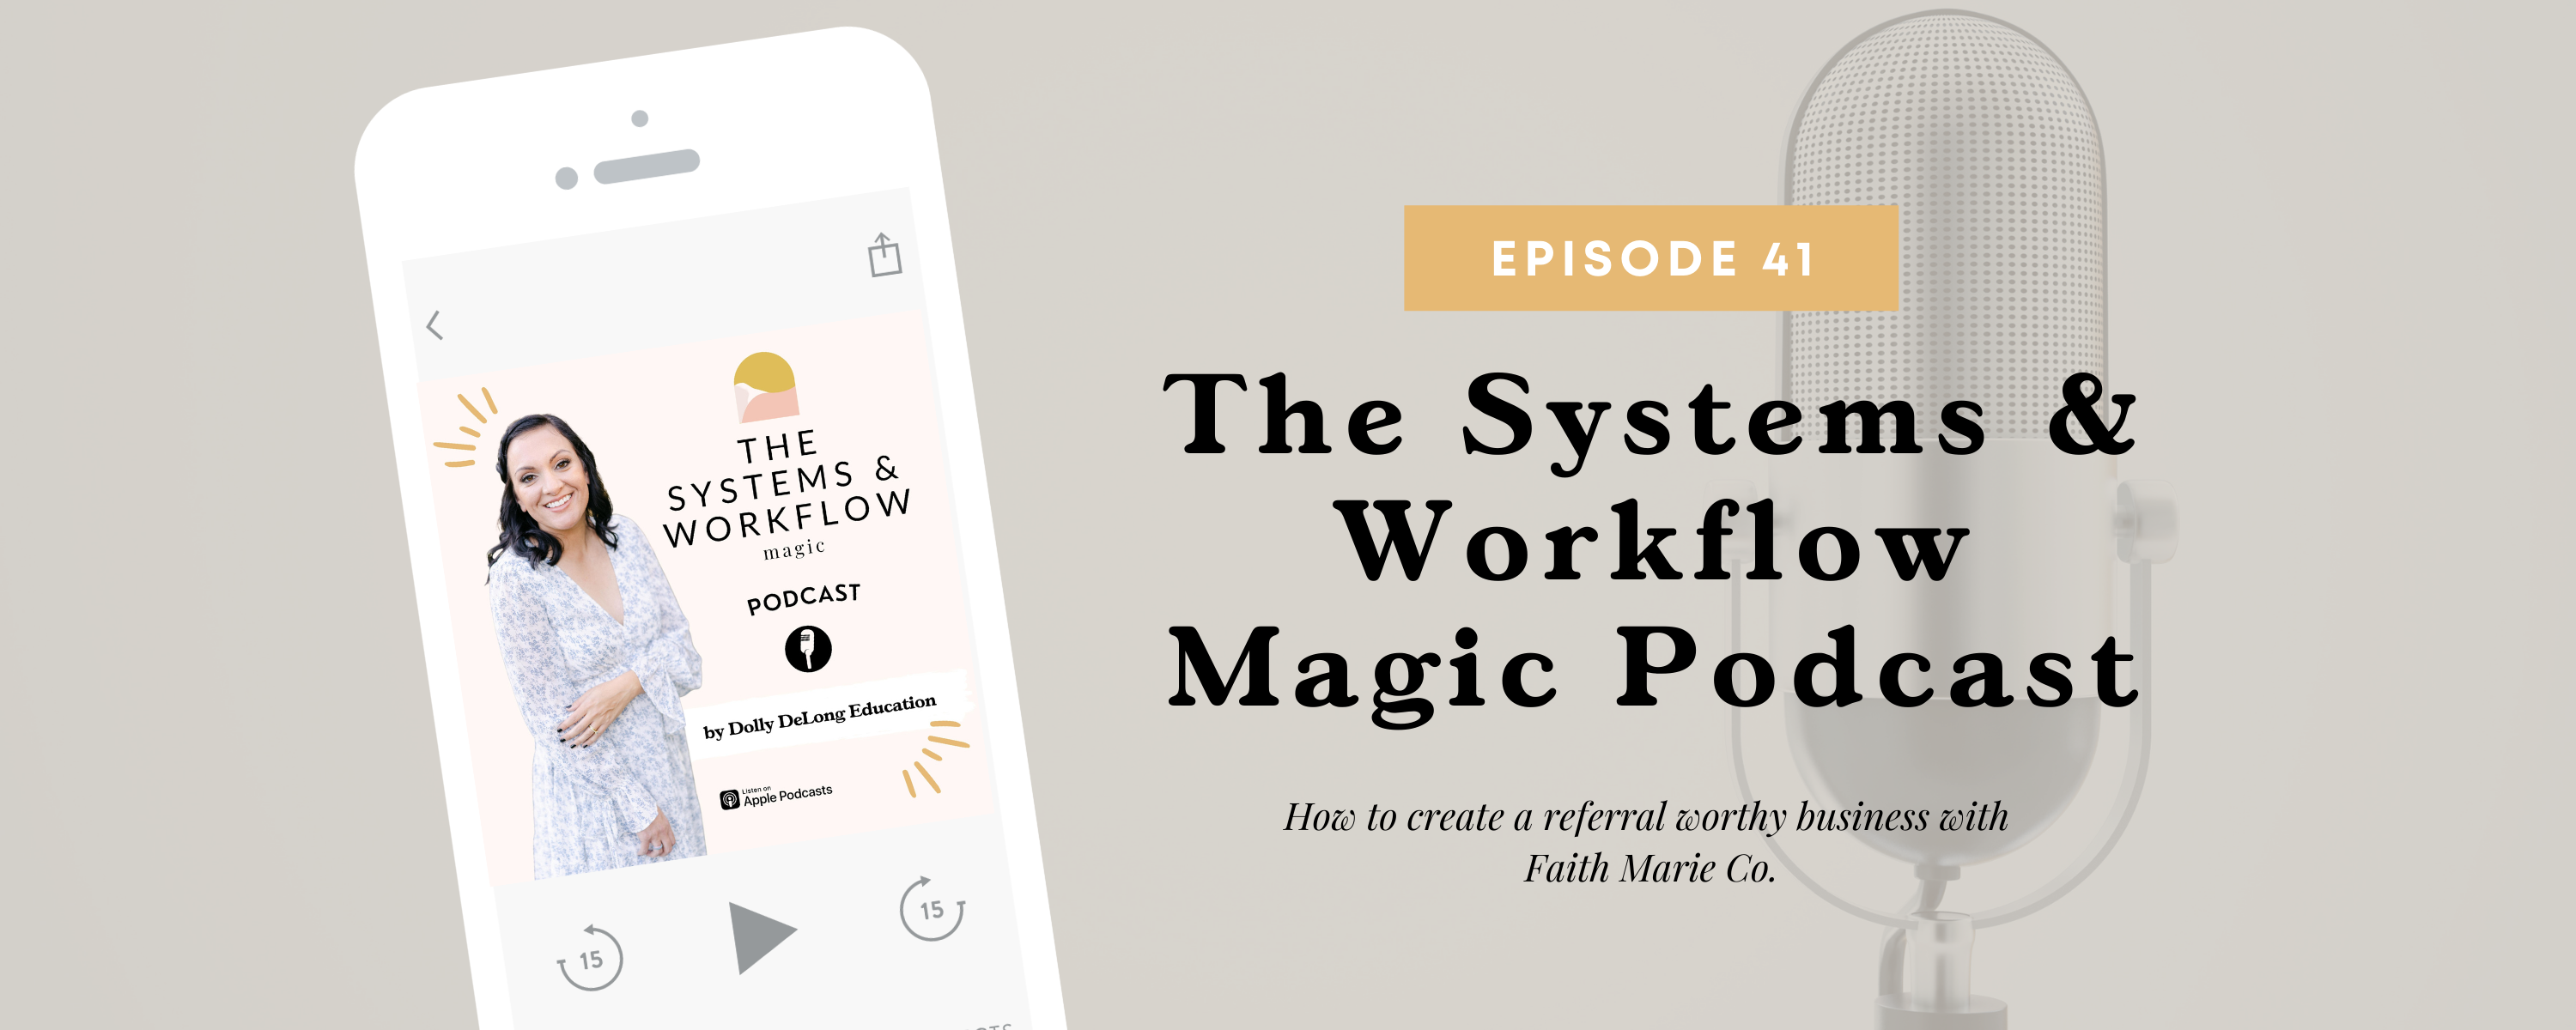 Episode 41 of the Systems and Workflow Magic Podcast with Dolly DeLong